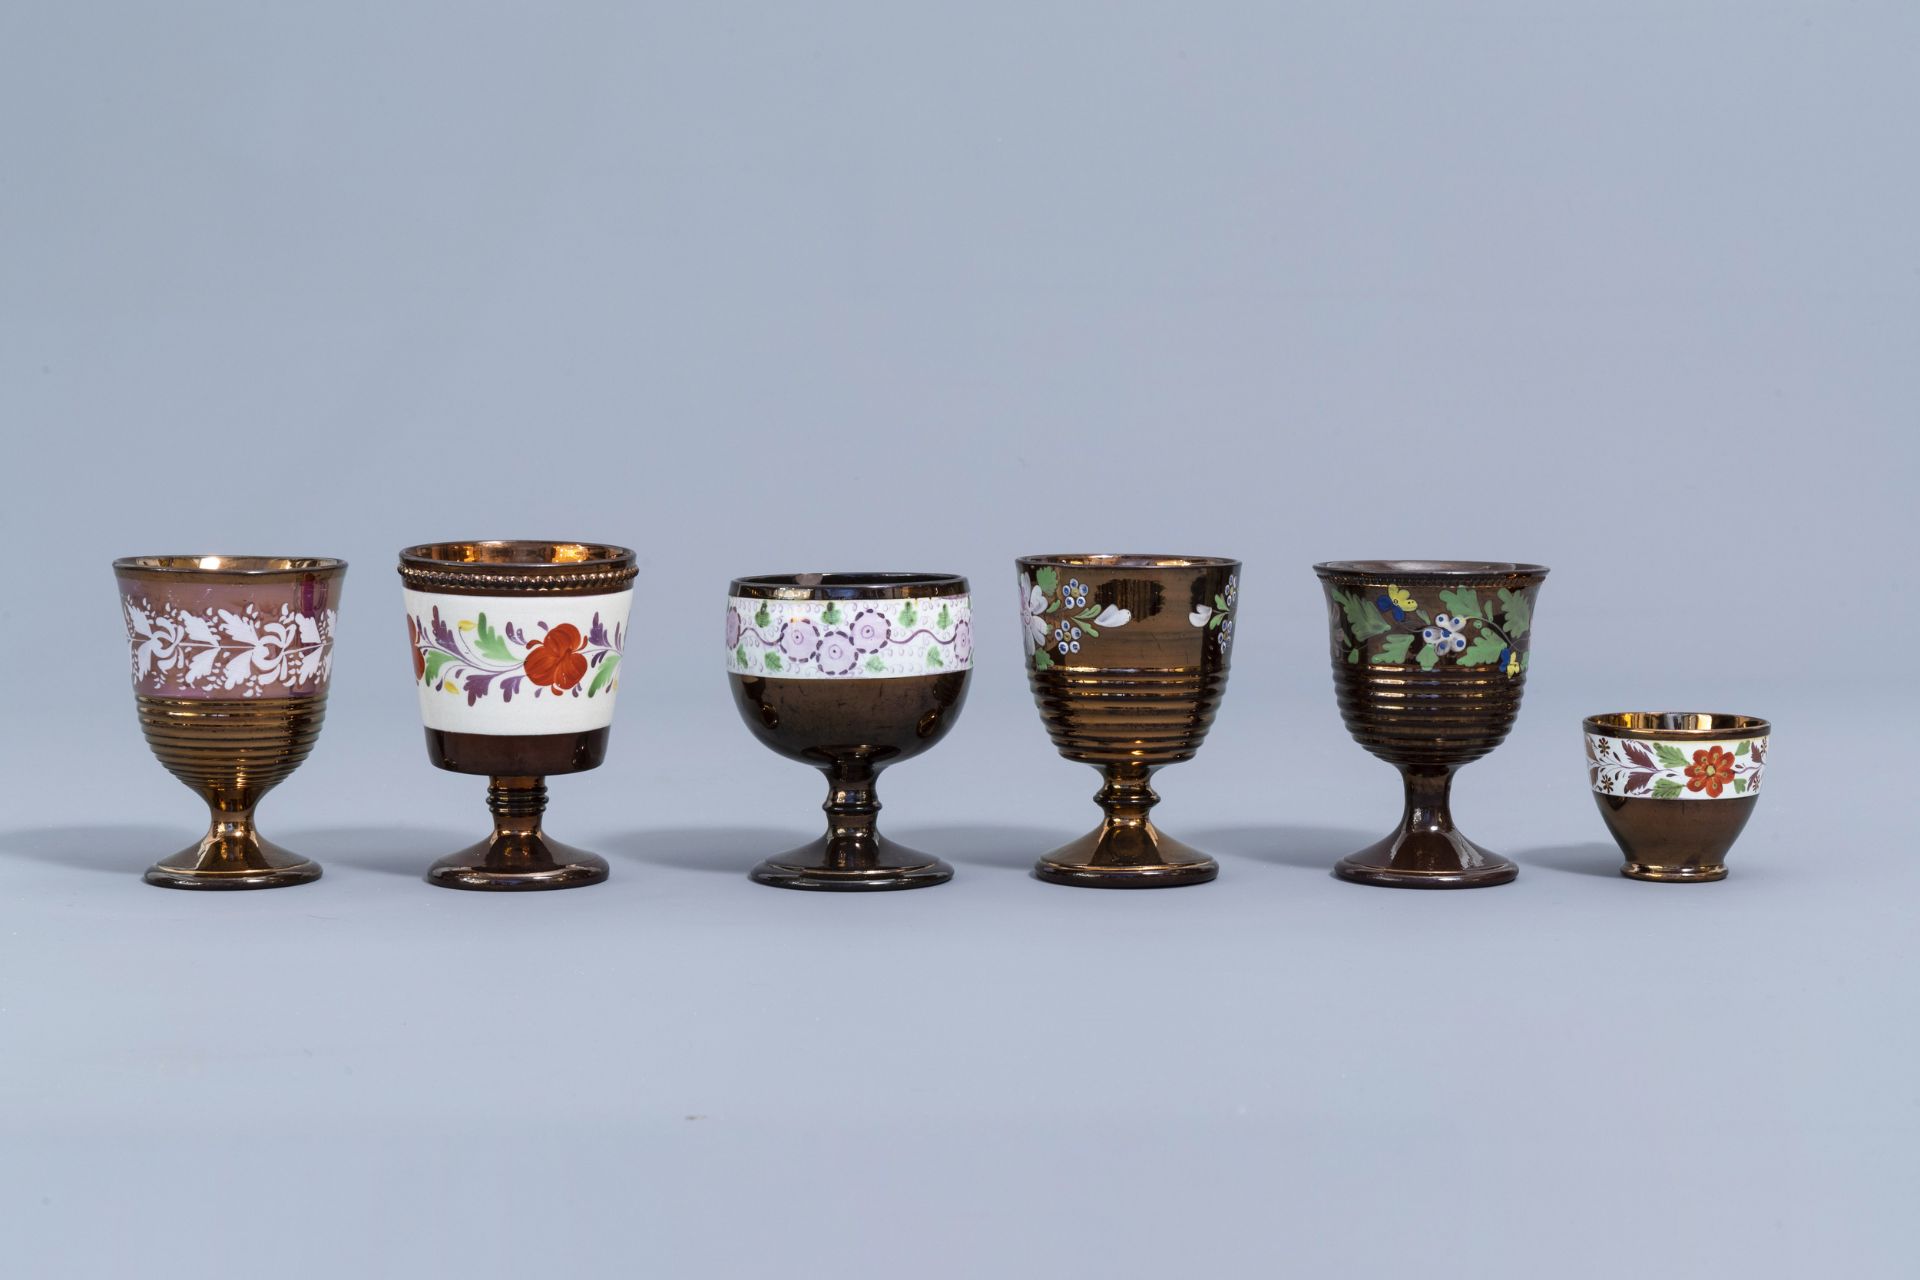 A varied collection of English lustreware items with polychrome floral design, 19th C. - Image 62 of 64